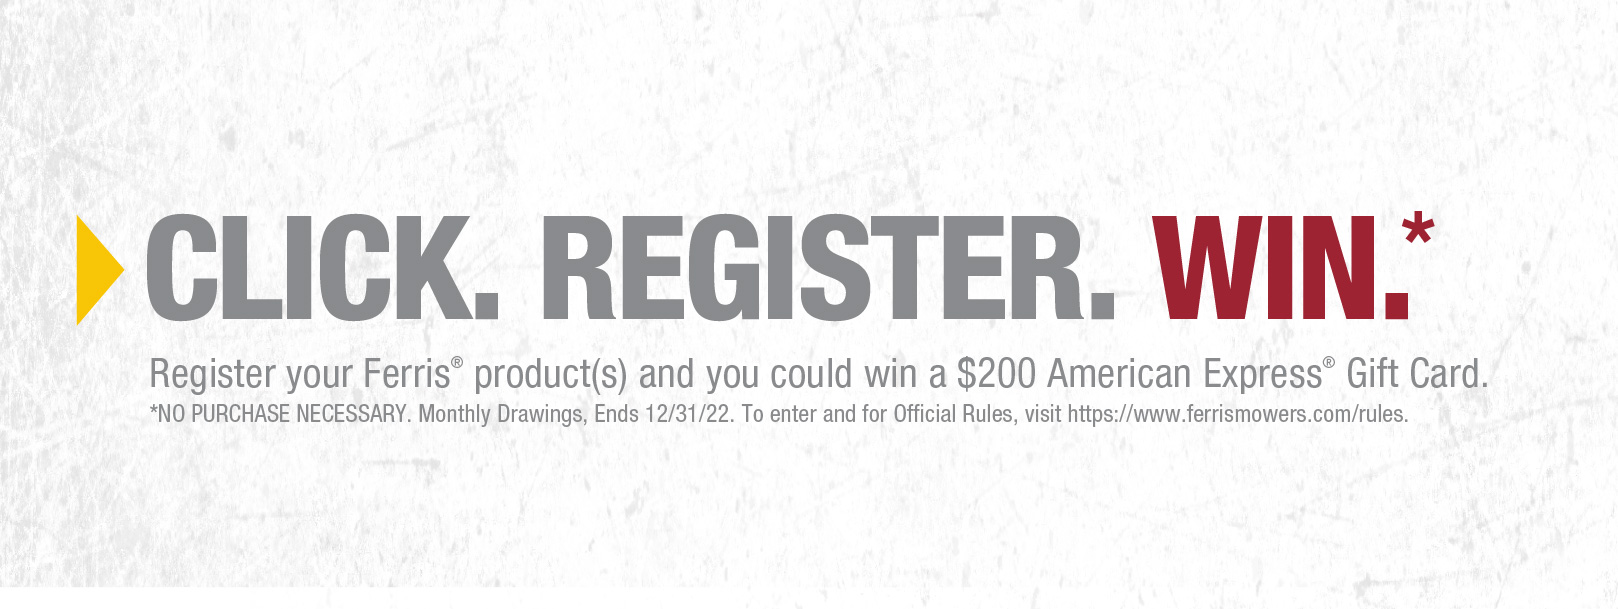 Click. Register. Win. Sweepstakes text